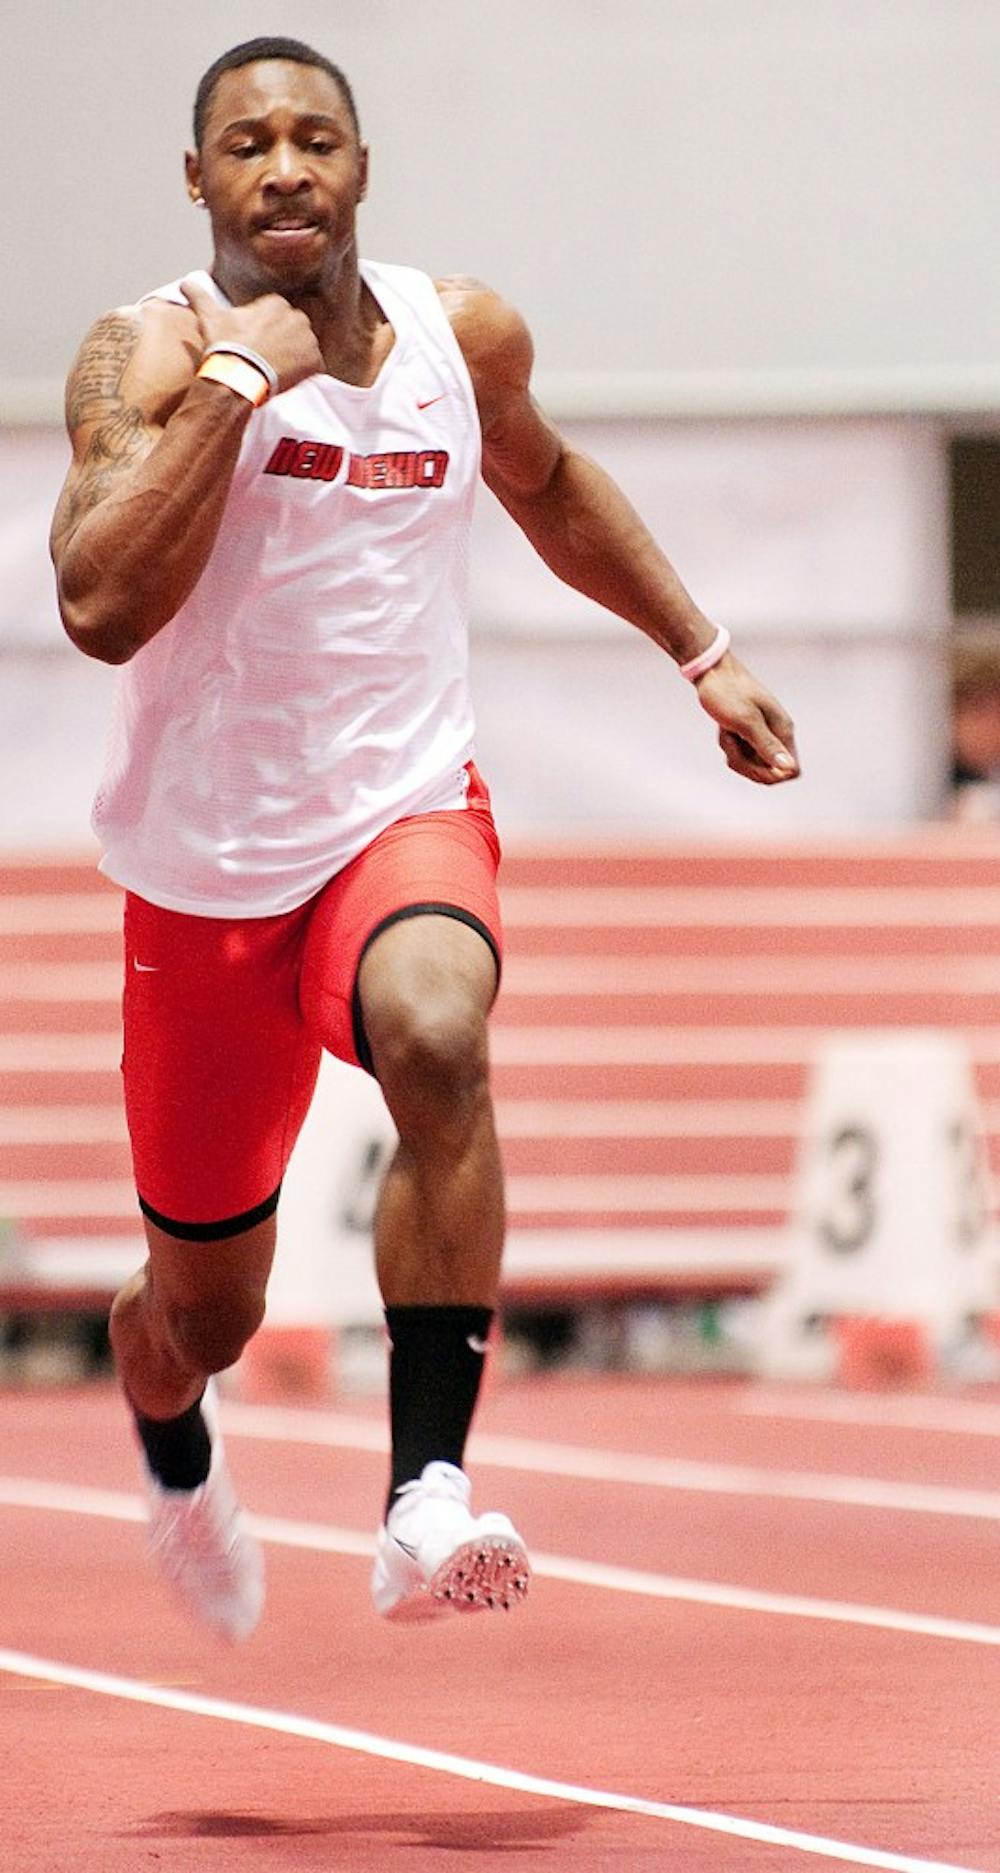 	Lamaar Thomas whirls down the track at the Albuquerque Convention Center on Saturday. Thomas, who transferred from Ohio State to play UNM football, is currently competing in track and field during the mandatory NCAA waiting period.